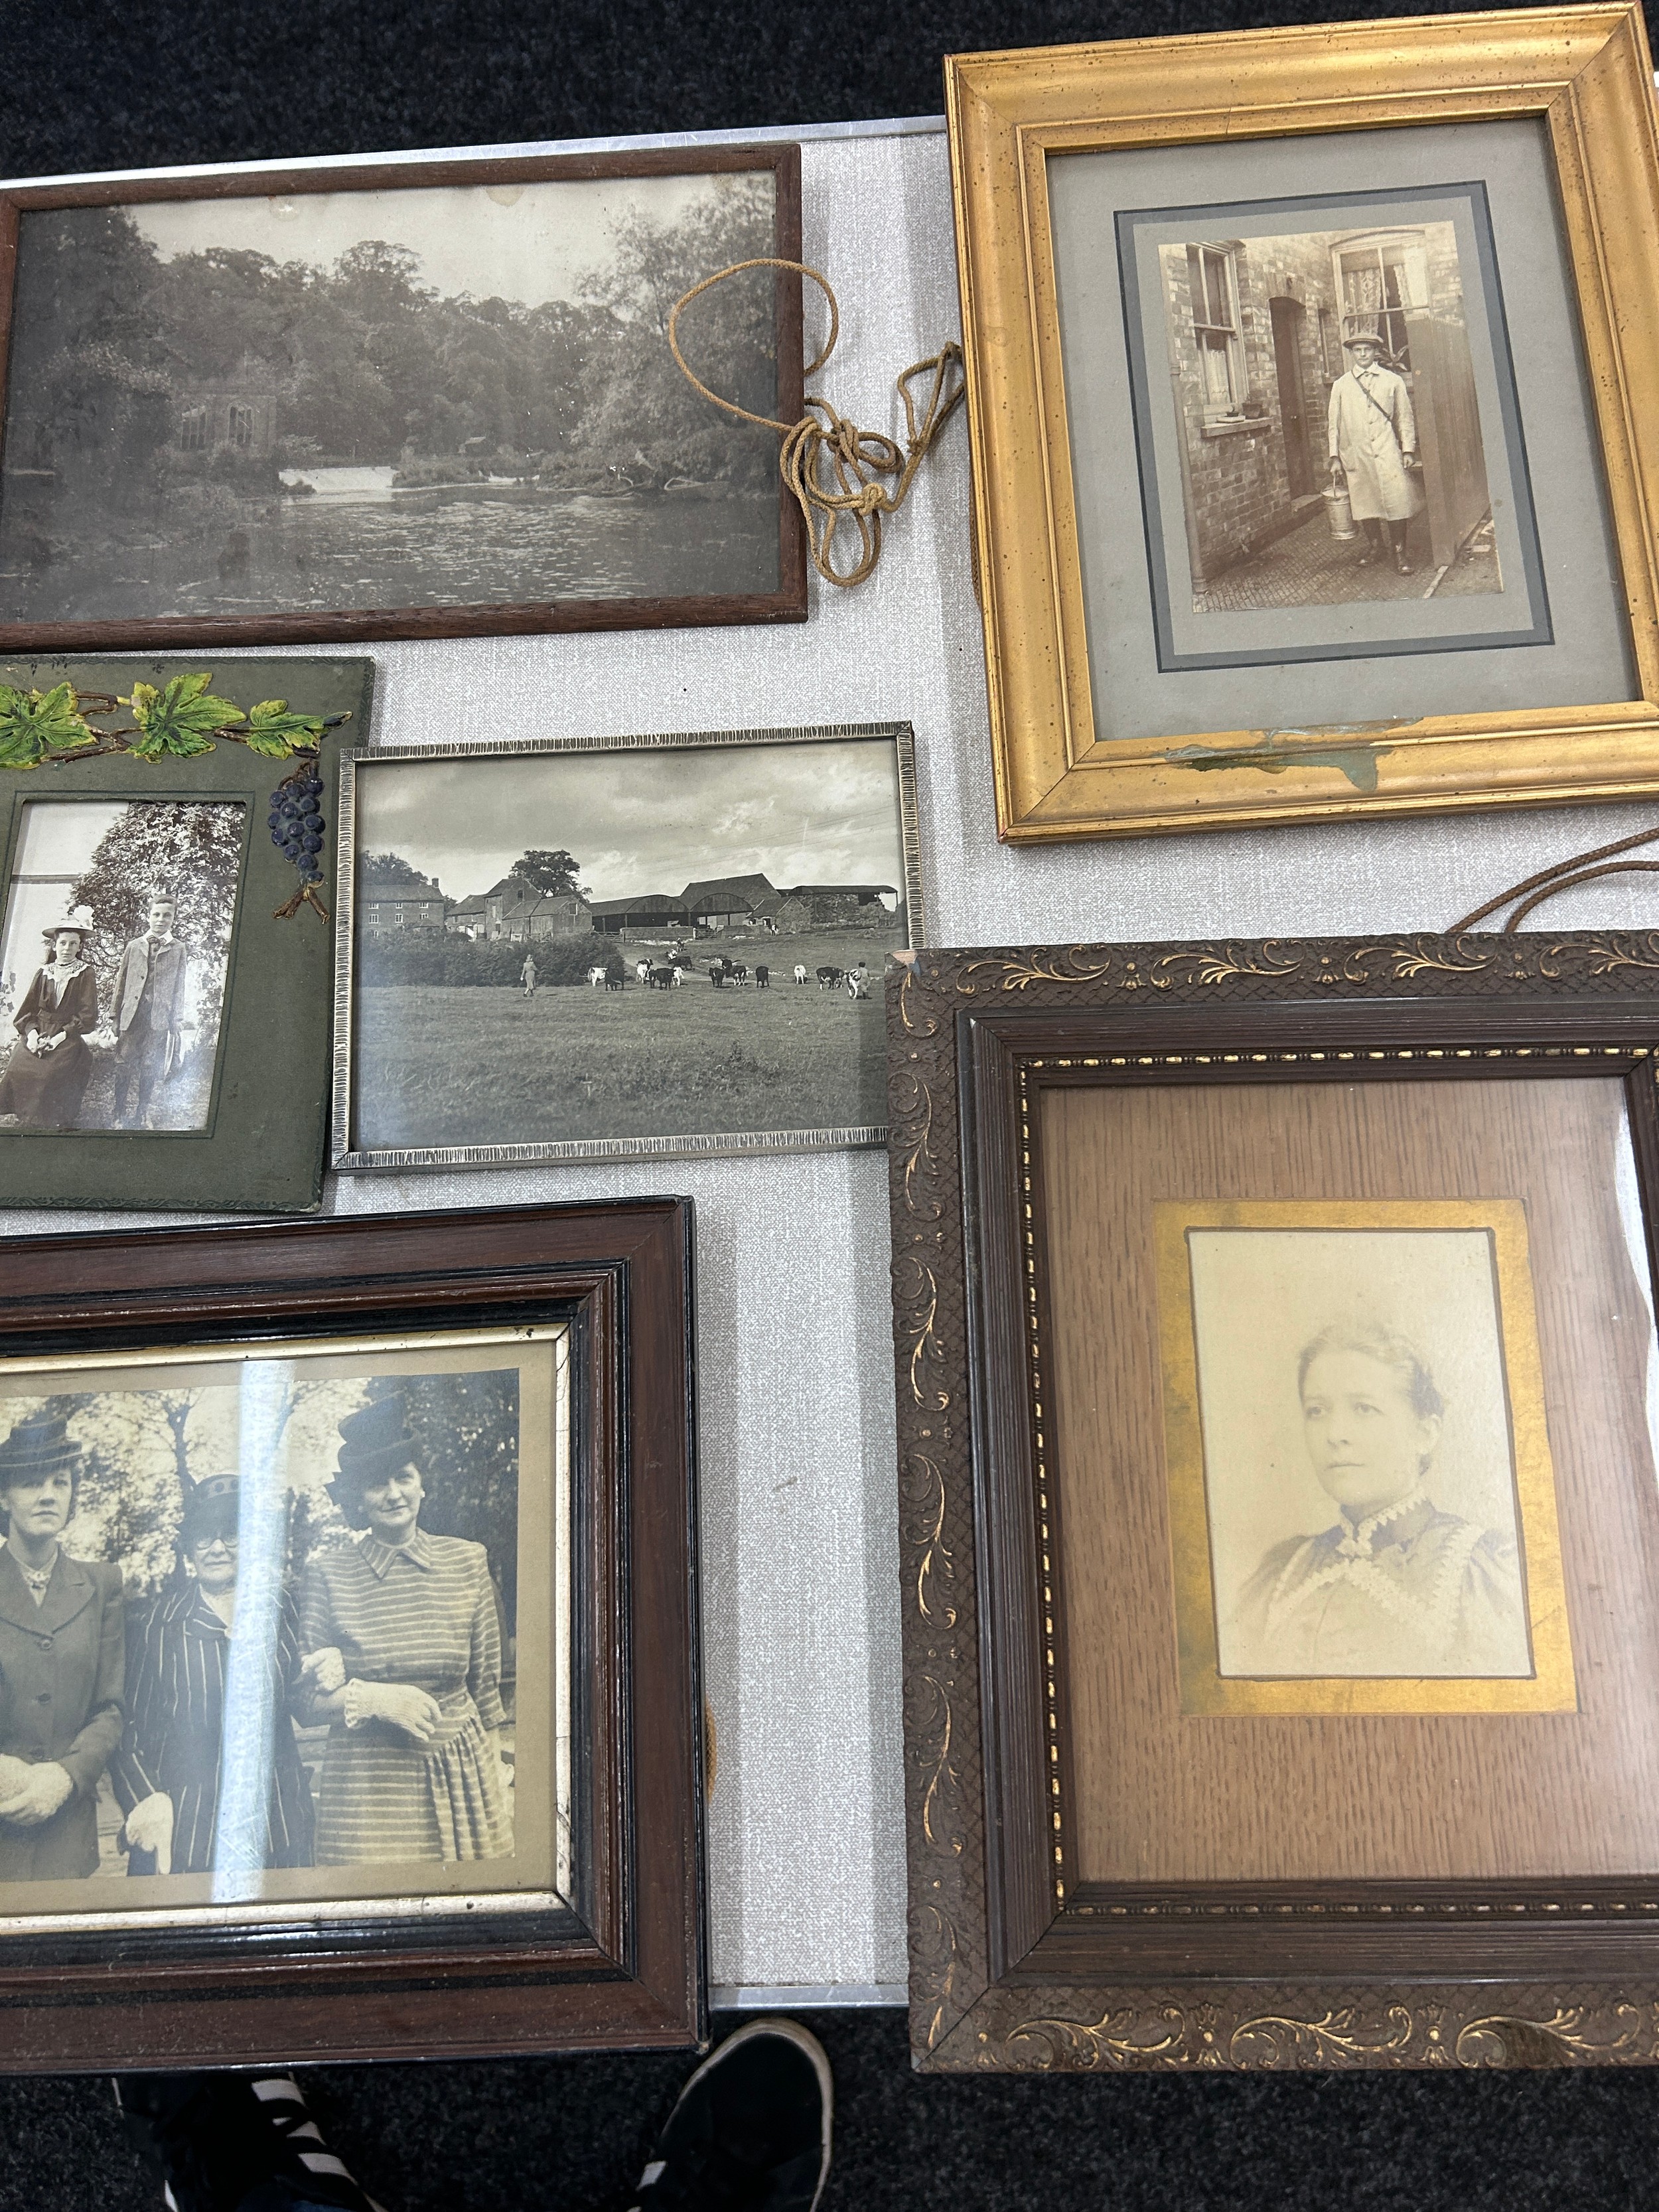 Large selection of framed antique photos largest measures approximately 16 inches by 16 inches - Image 4 of 10